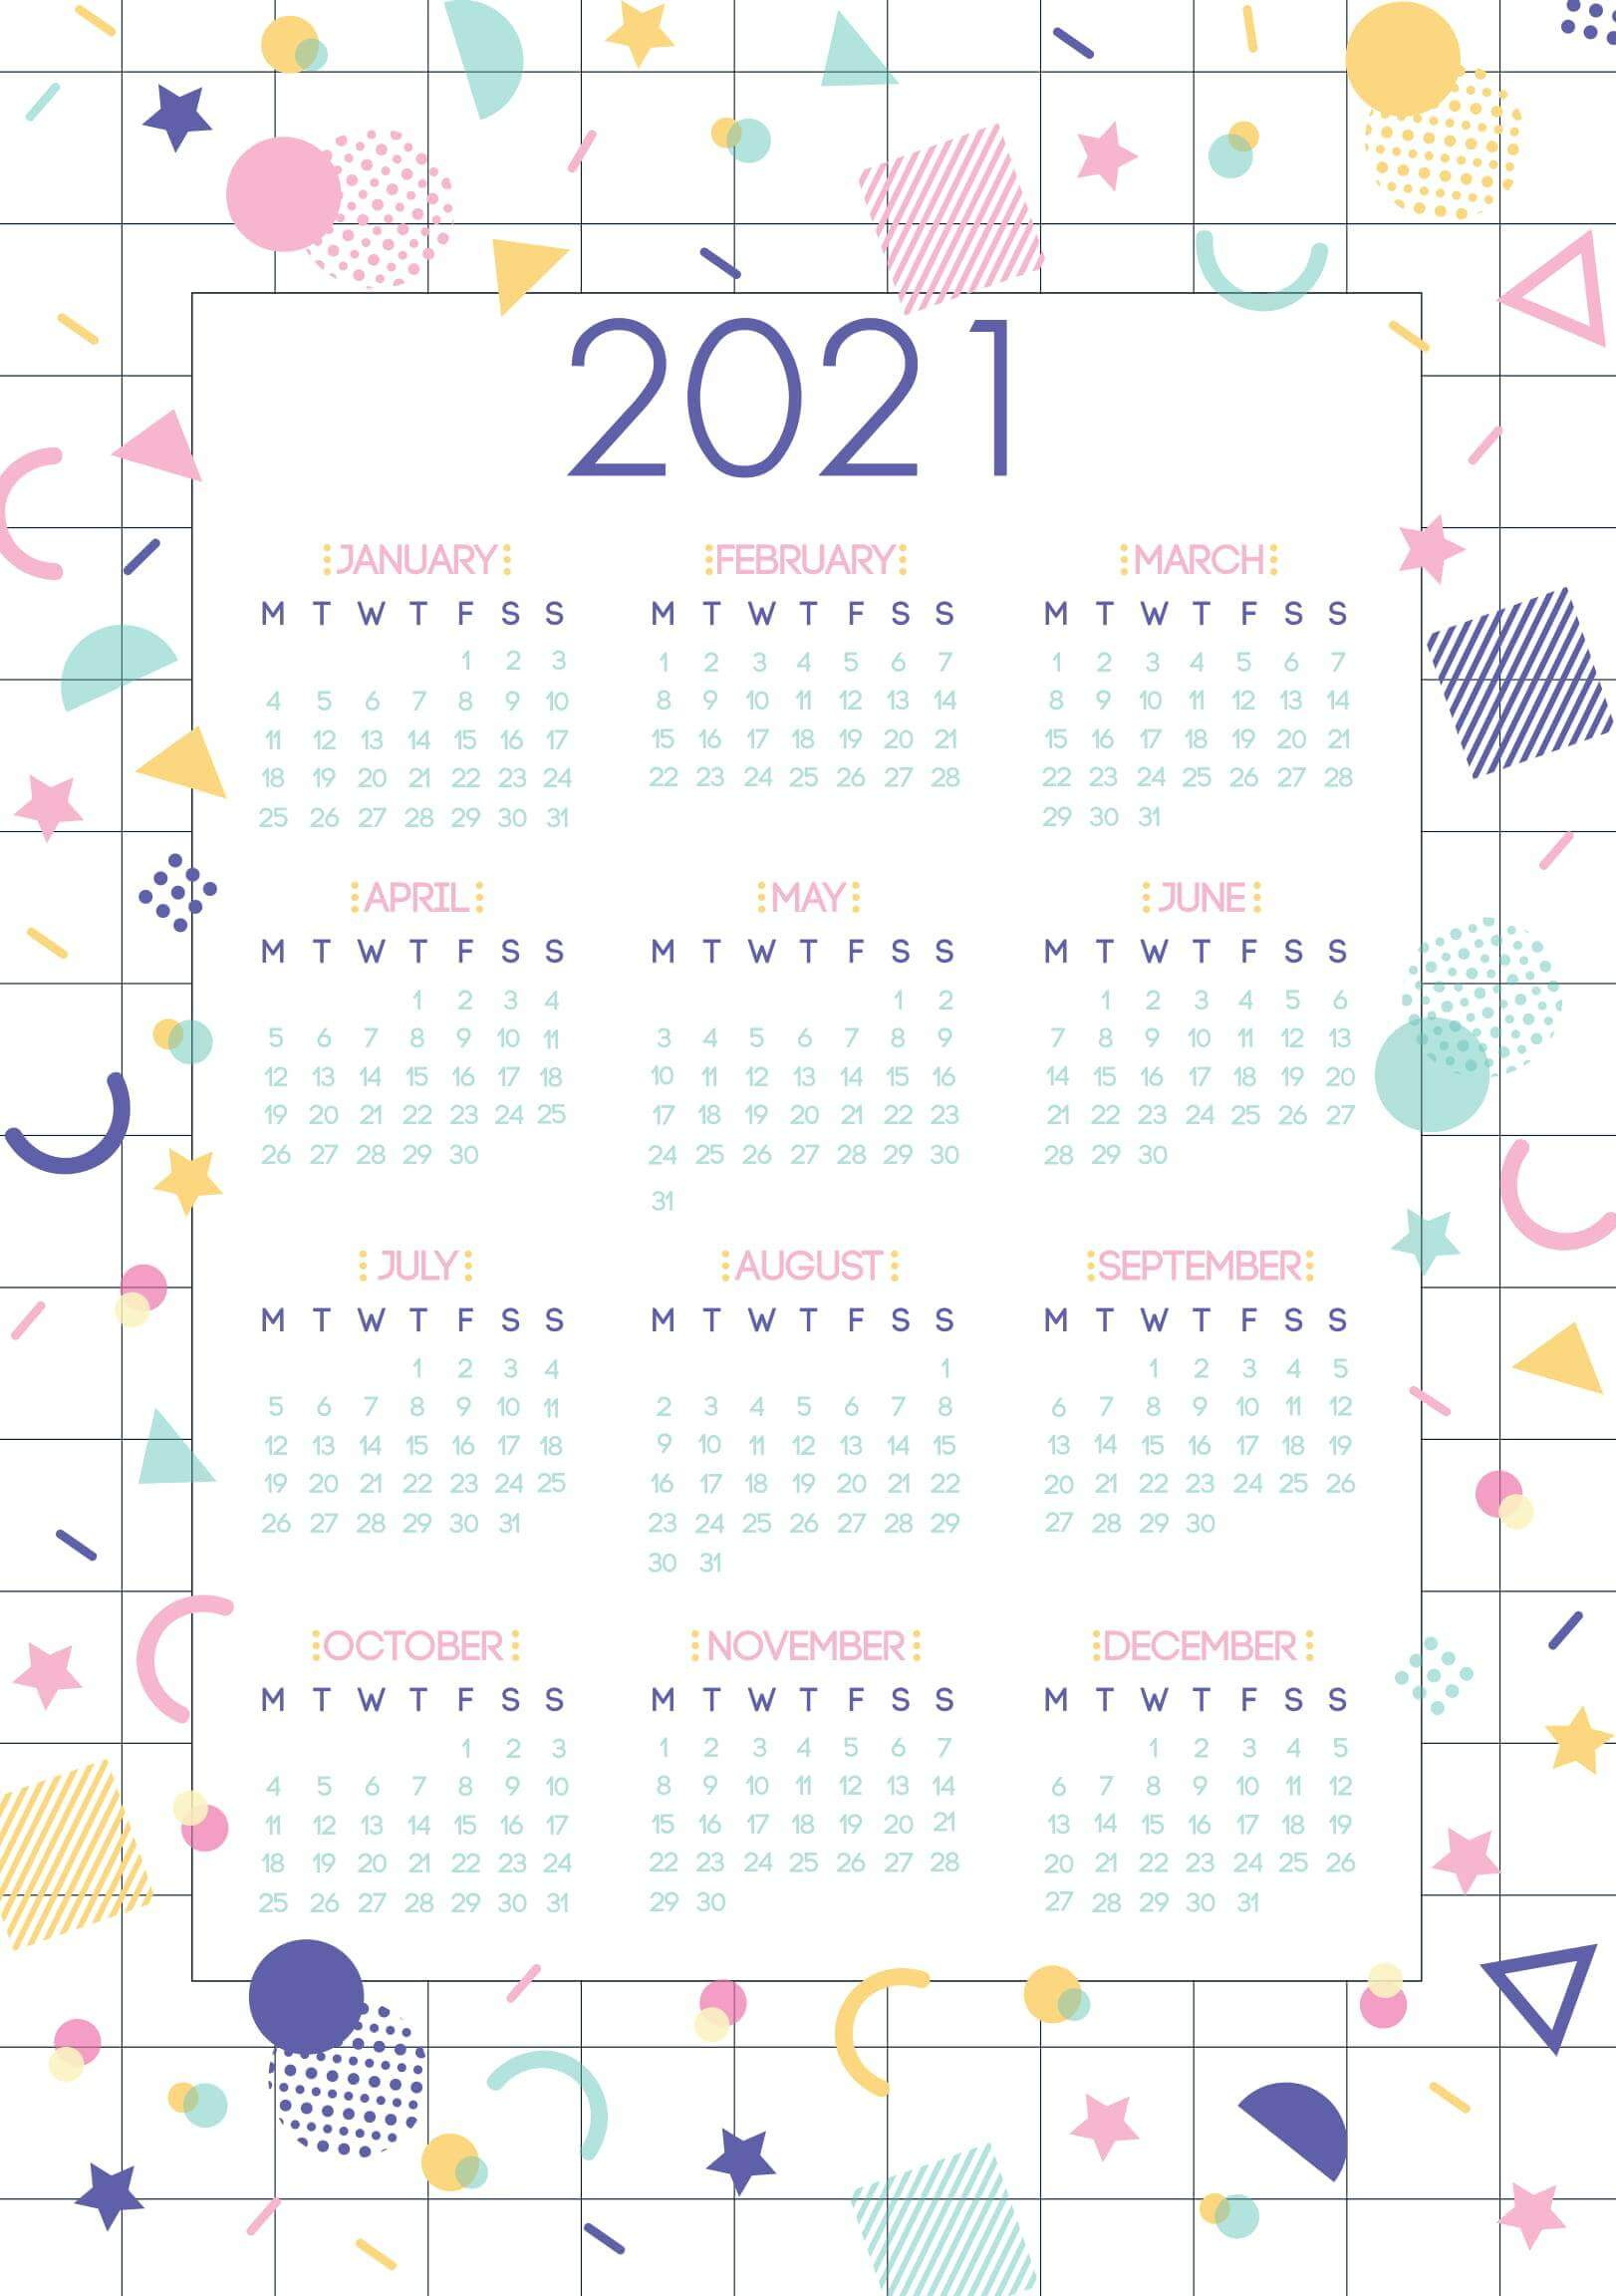 Free Yearly Calendar With Notes 2021 Template - One